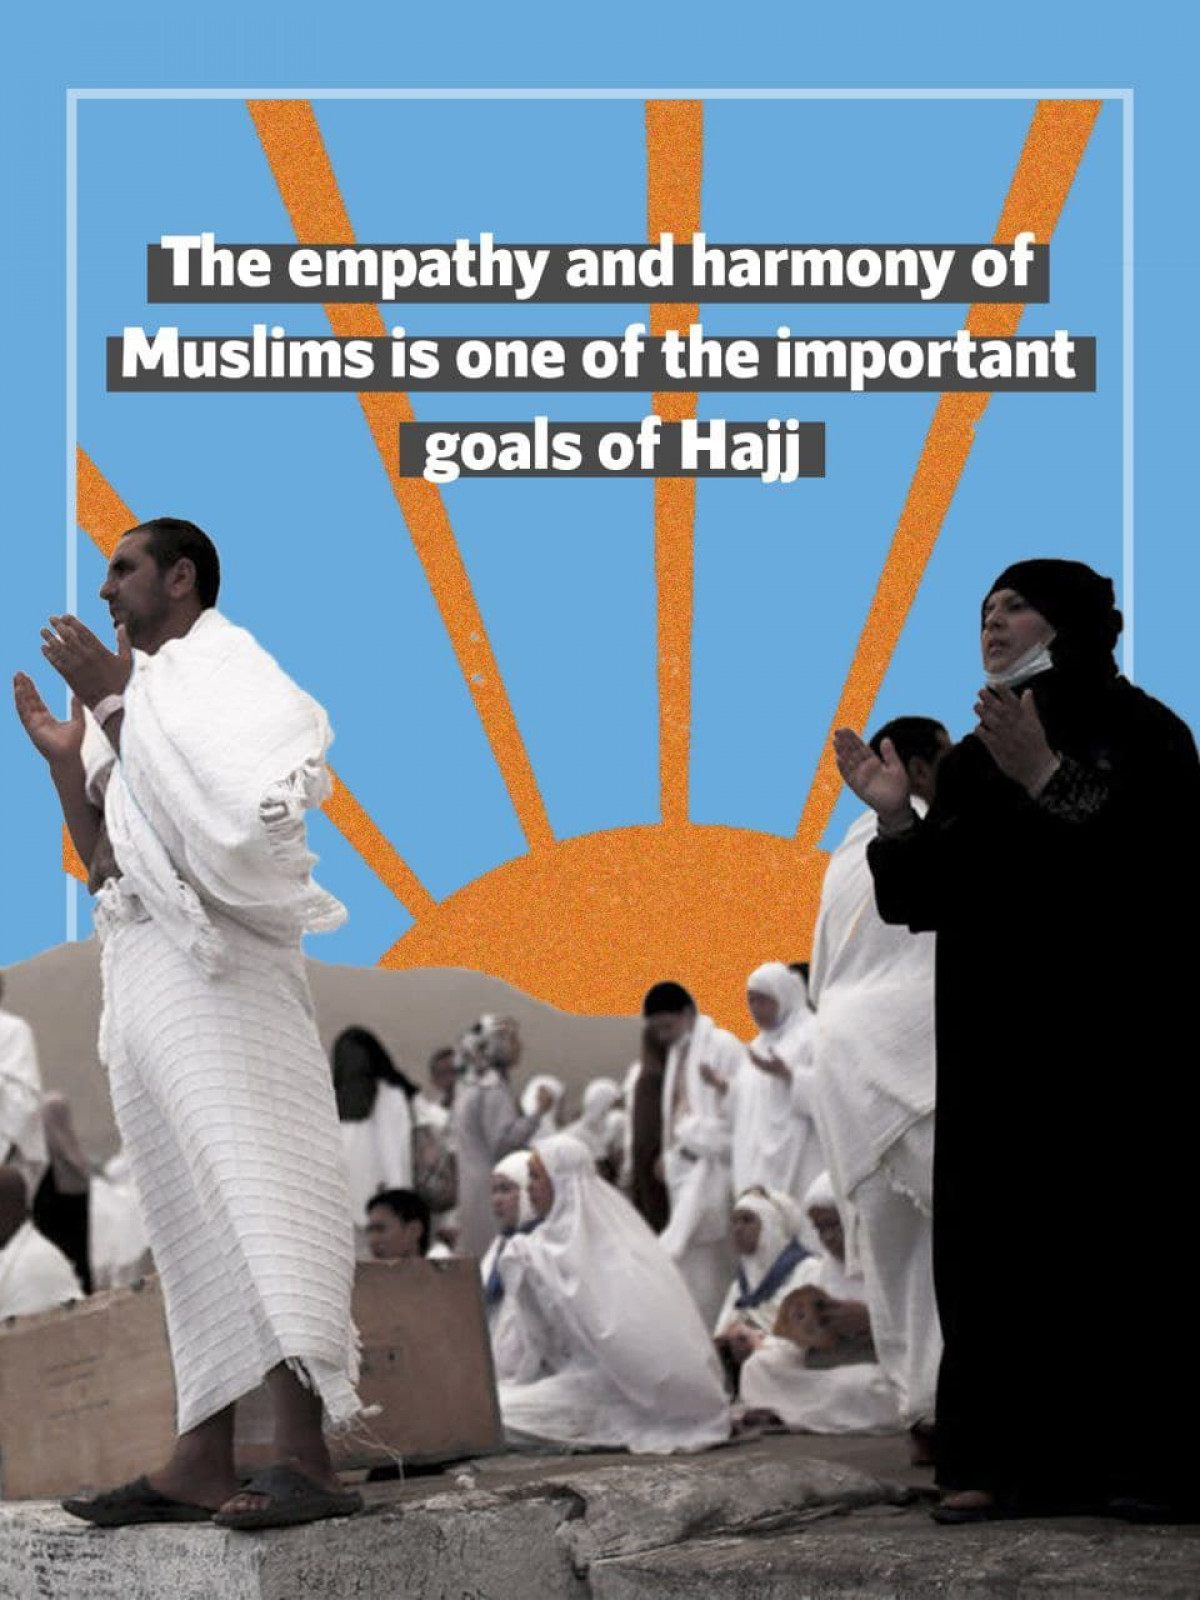 The empathy and harmony of Muslims is one of the important goals of Hajj